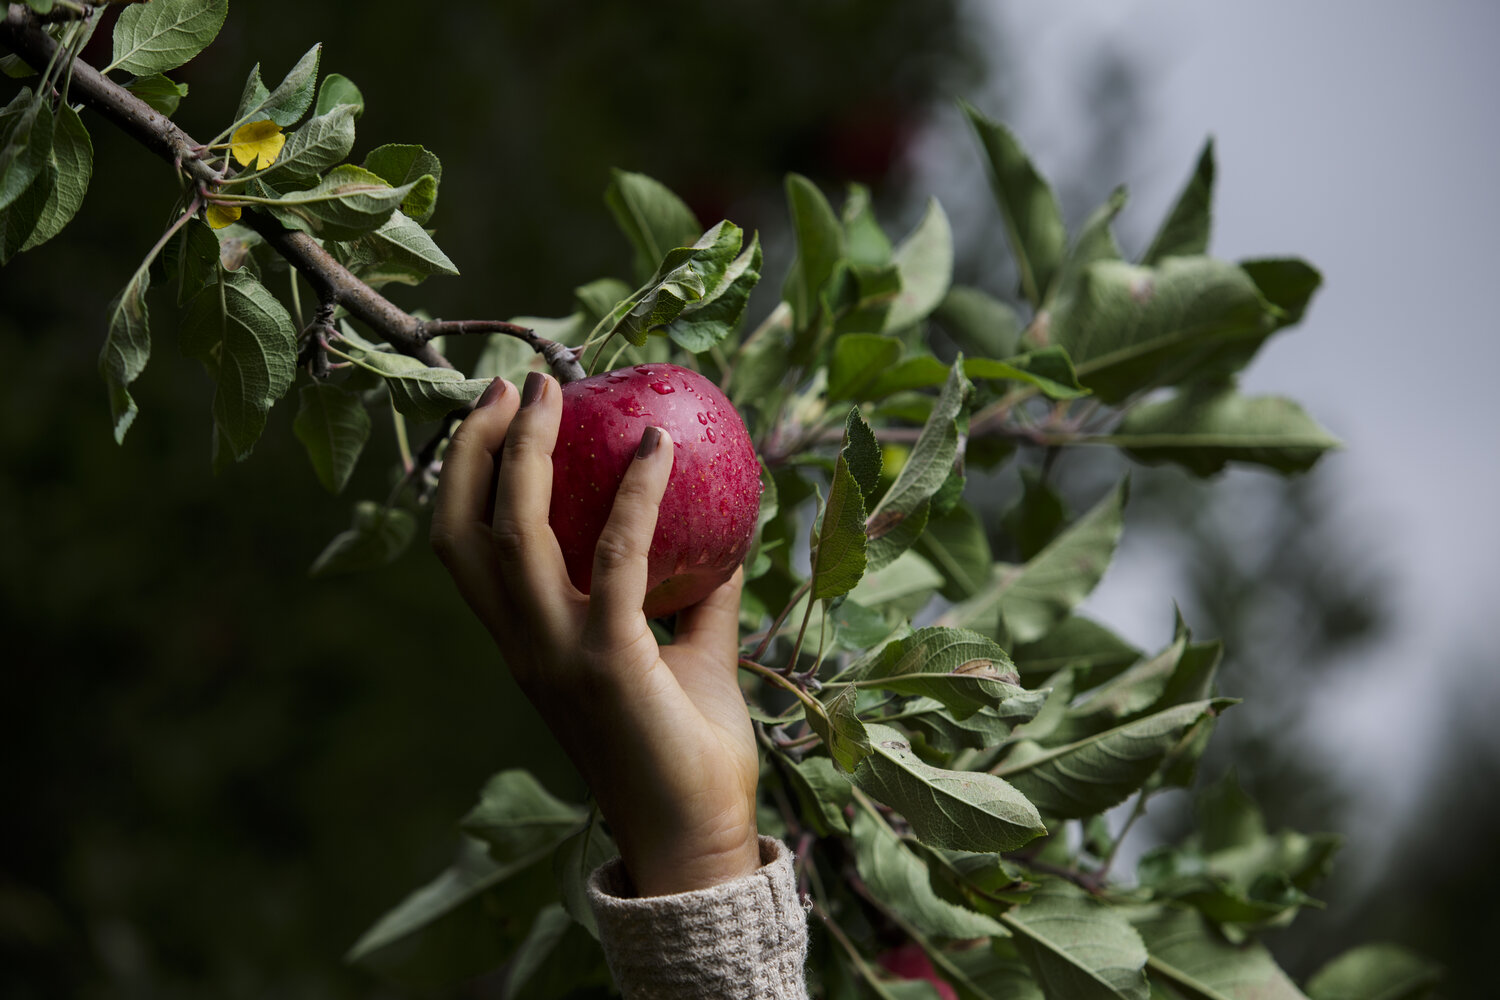 A person picking an apple from a tree.